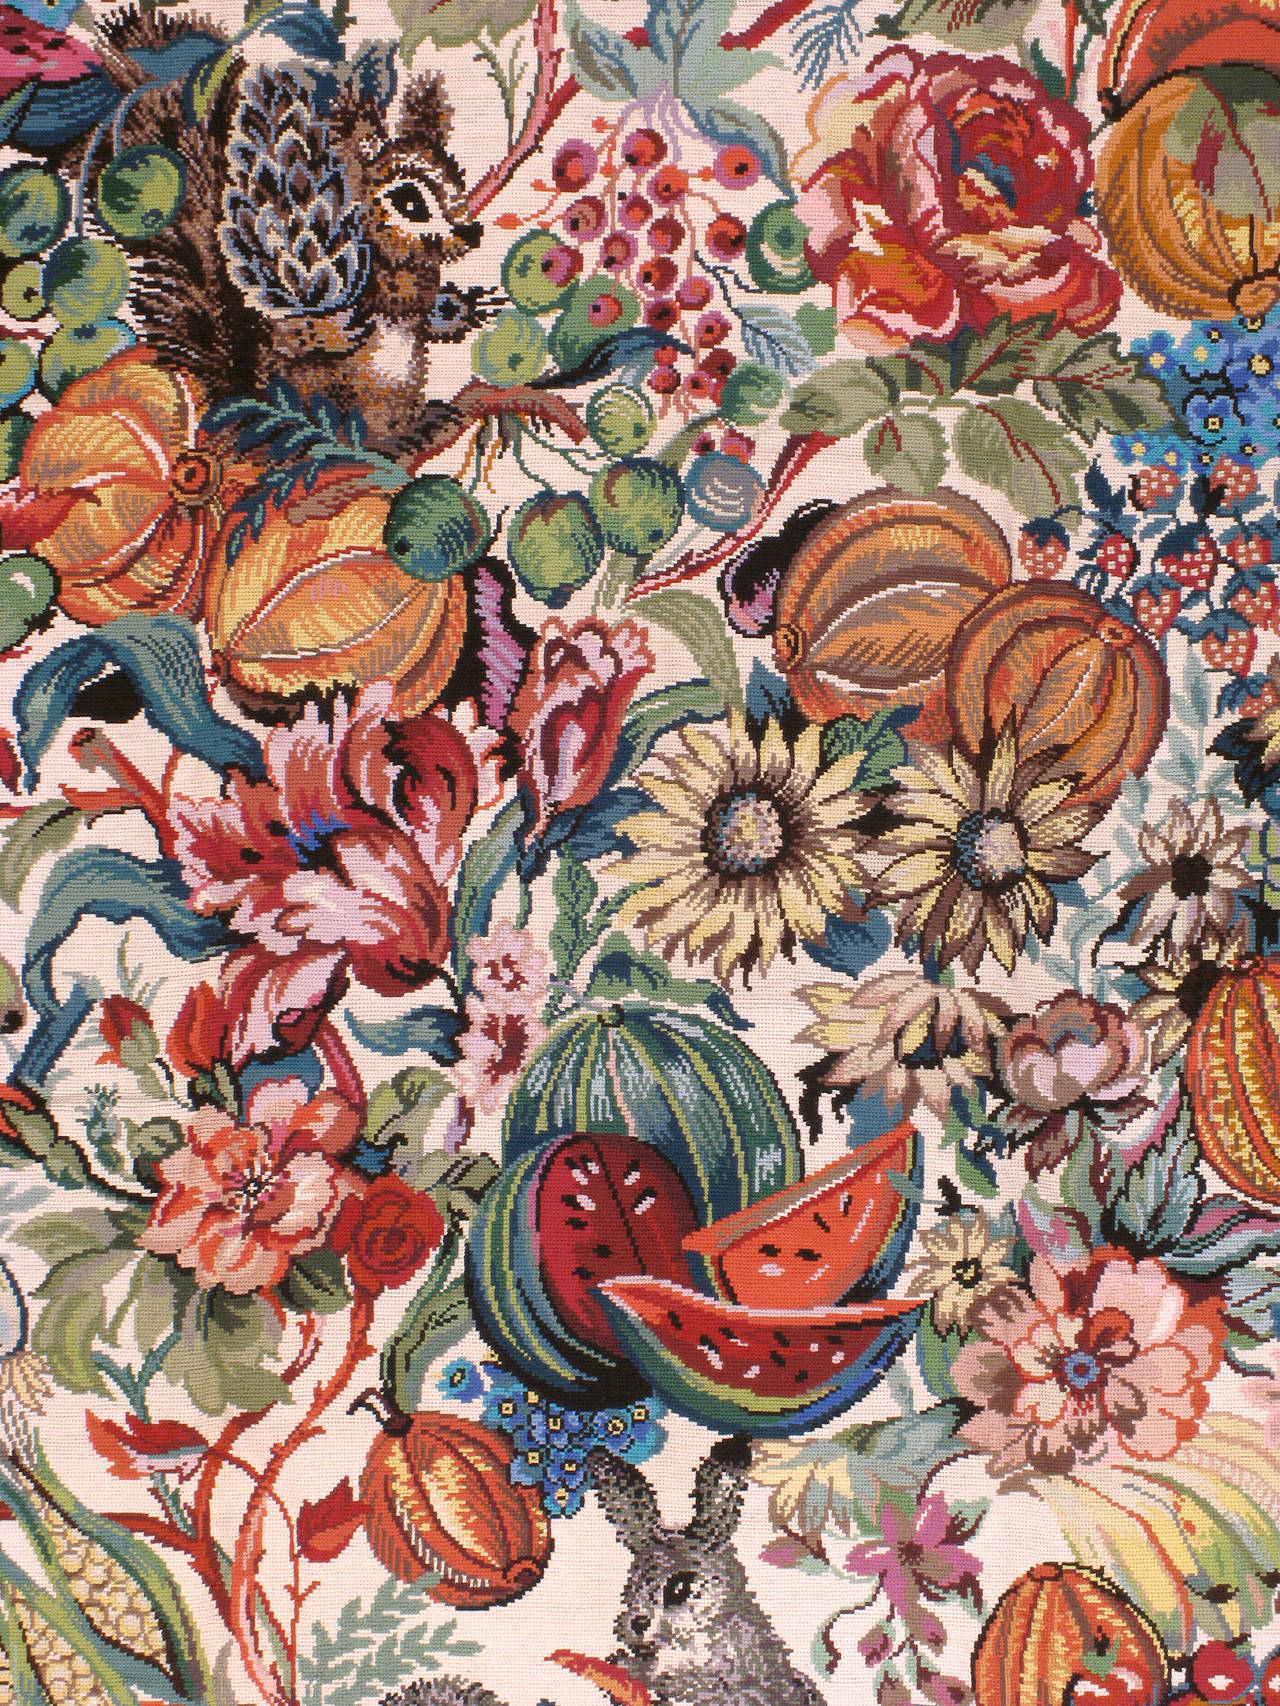 A late 20th century Portuguese needlepoint with vibrant motifs of seasonal animals, flowers, fruits and vegetables.